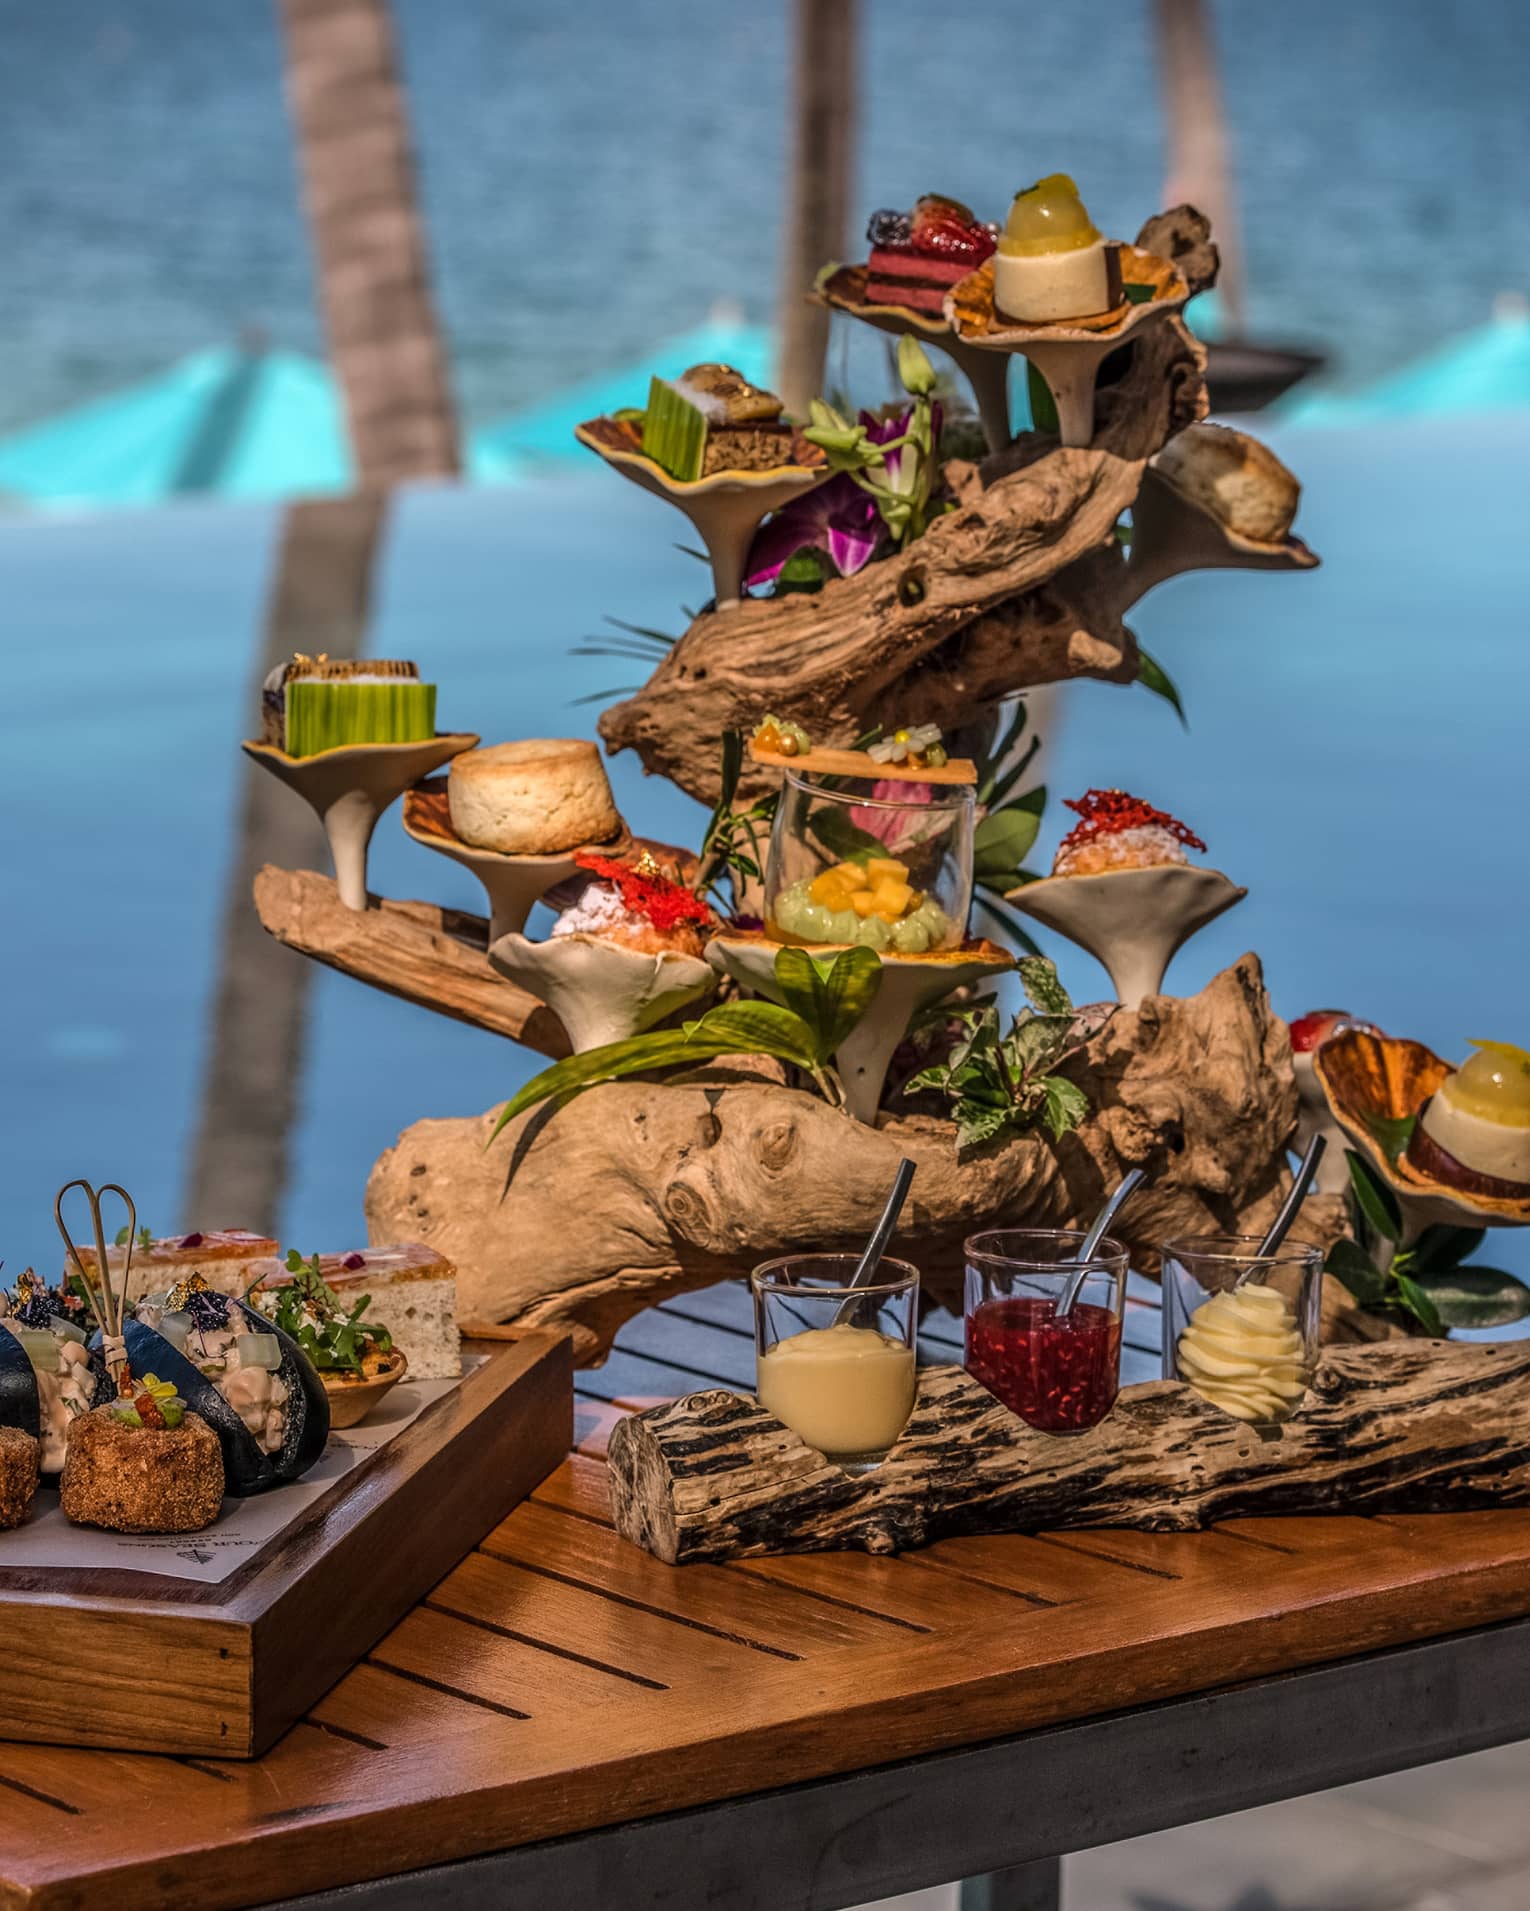 Afternoon tea spread with sweets and savouries presented on a piece of driftwood